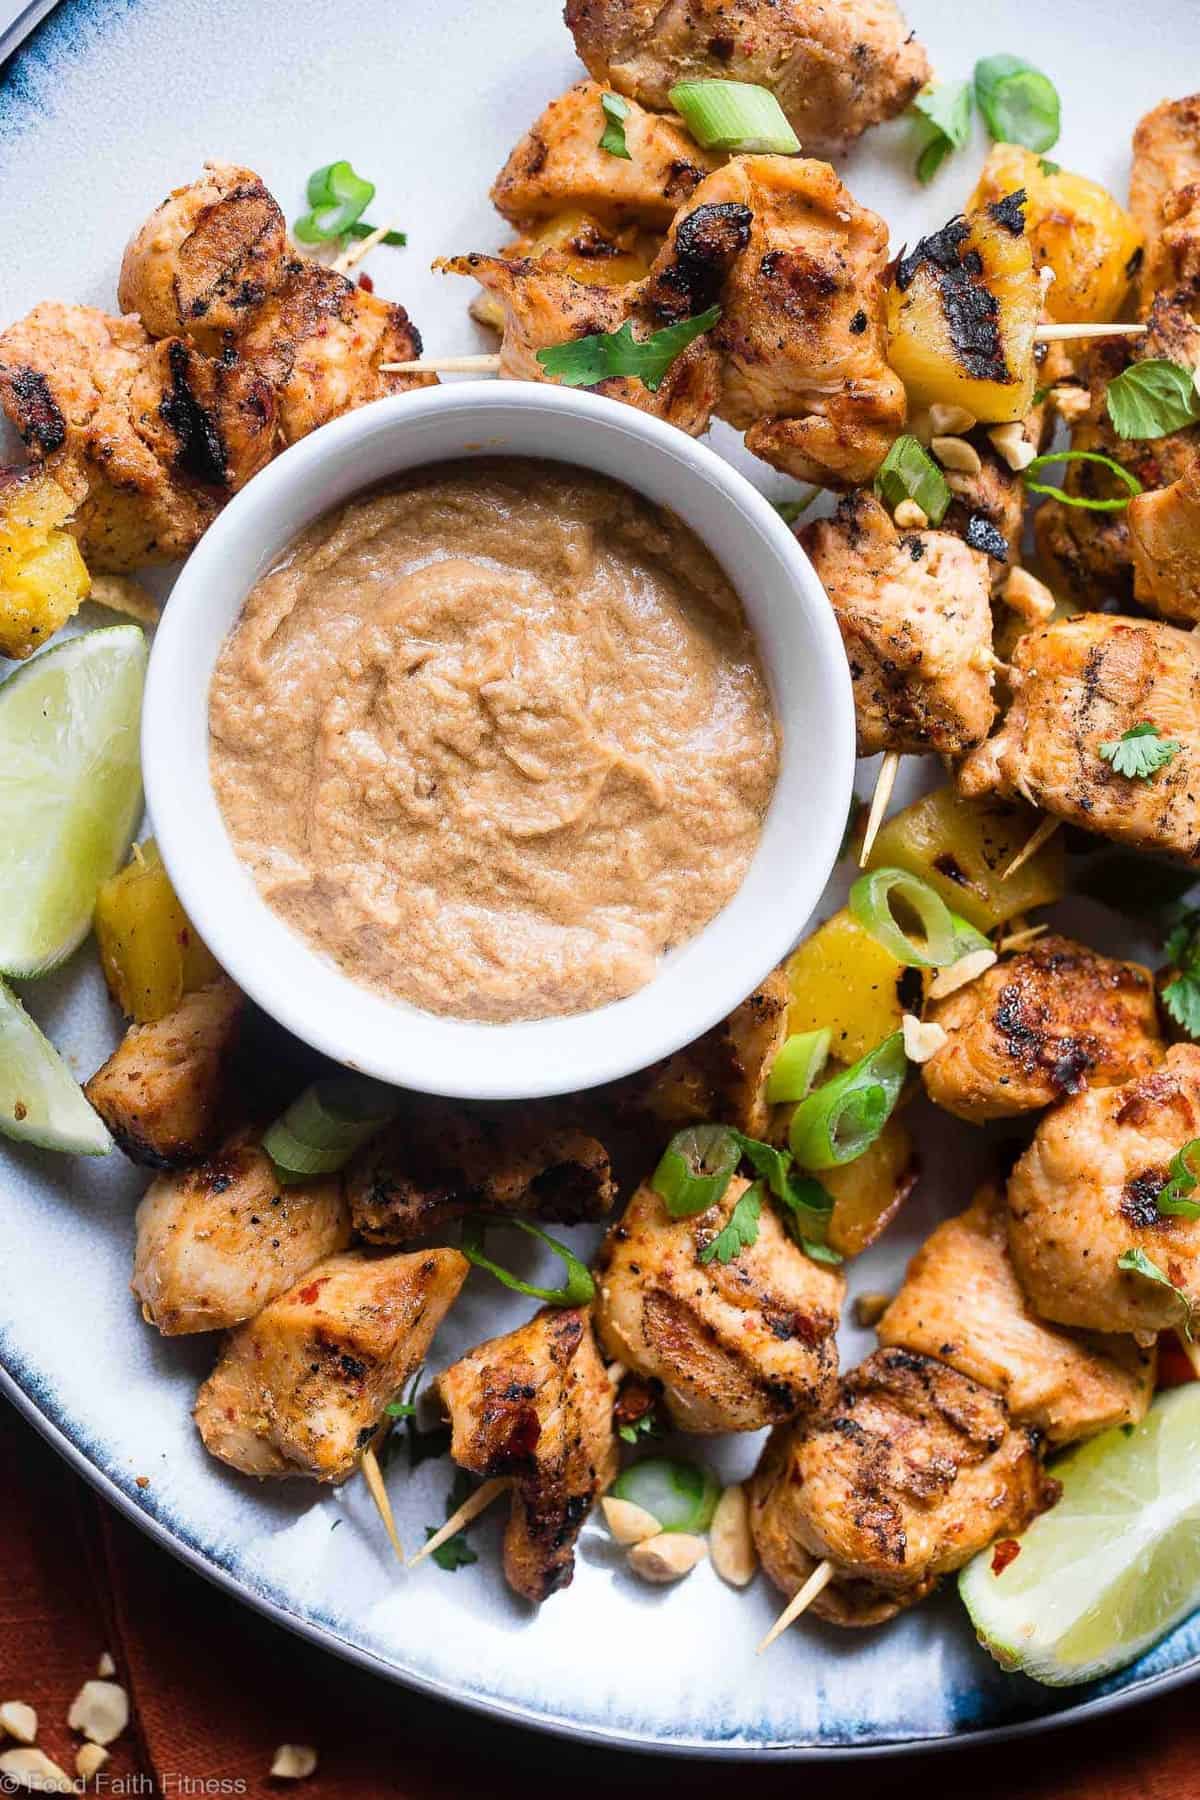 Grilled Pineapple Thai Chicken Skewers with Peanut Sauce - Addictingly spicy, with just a bit of smoky and sweet! The perfect healthy, gluten free dinner for summer with a paleo option! | #Foodfaithfitness | #Glutenfree #Paleo #Healthy #Dairyfree #Chicken